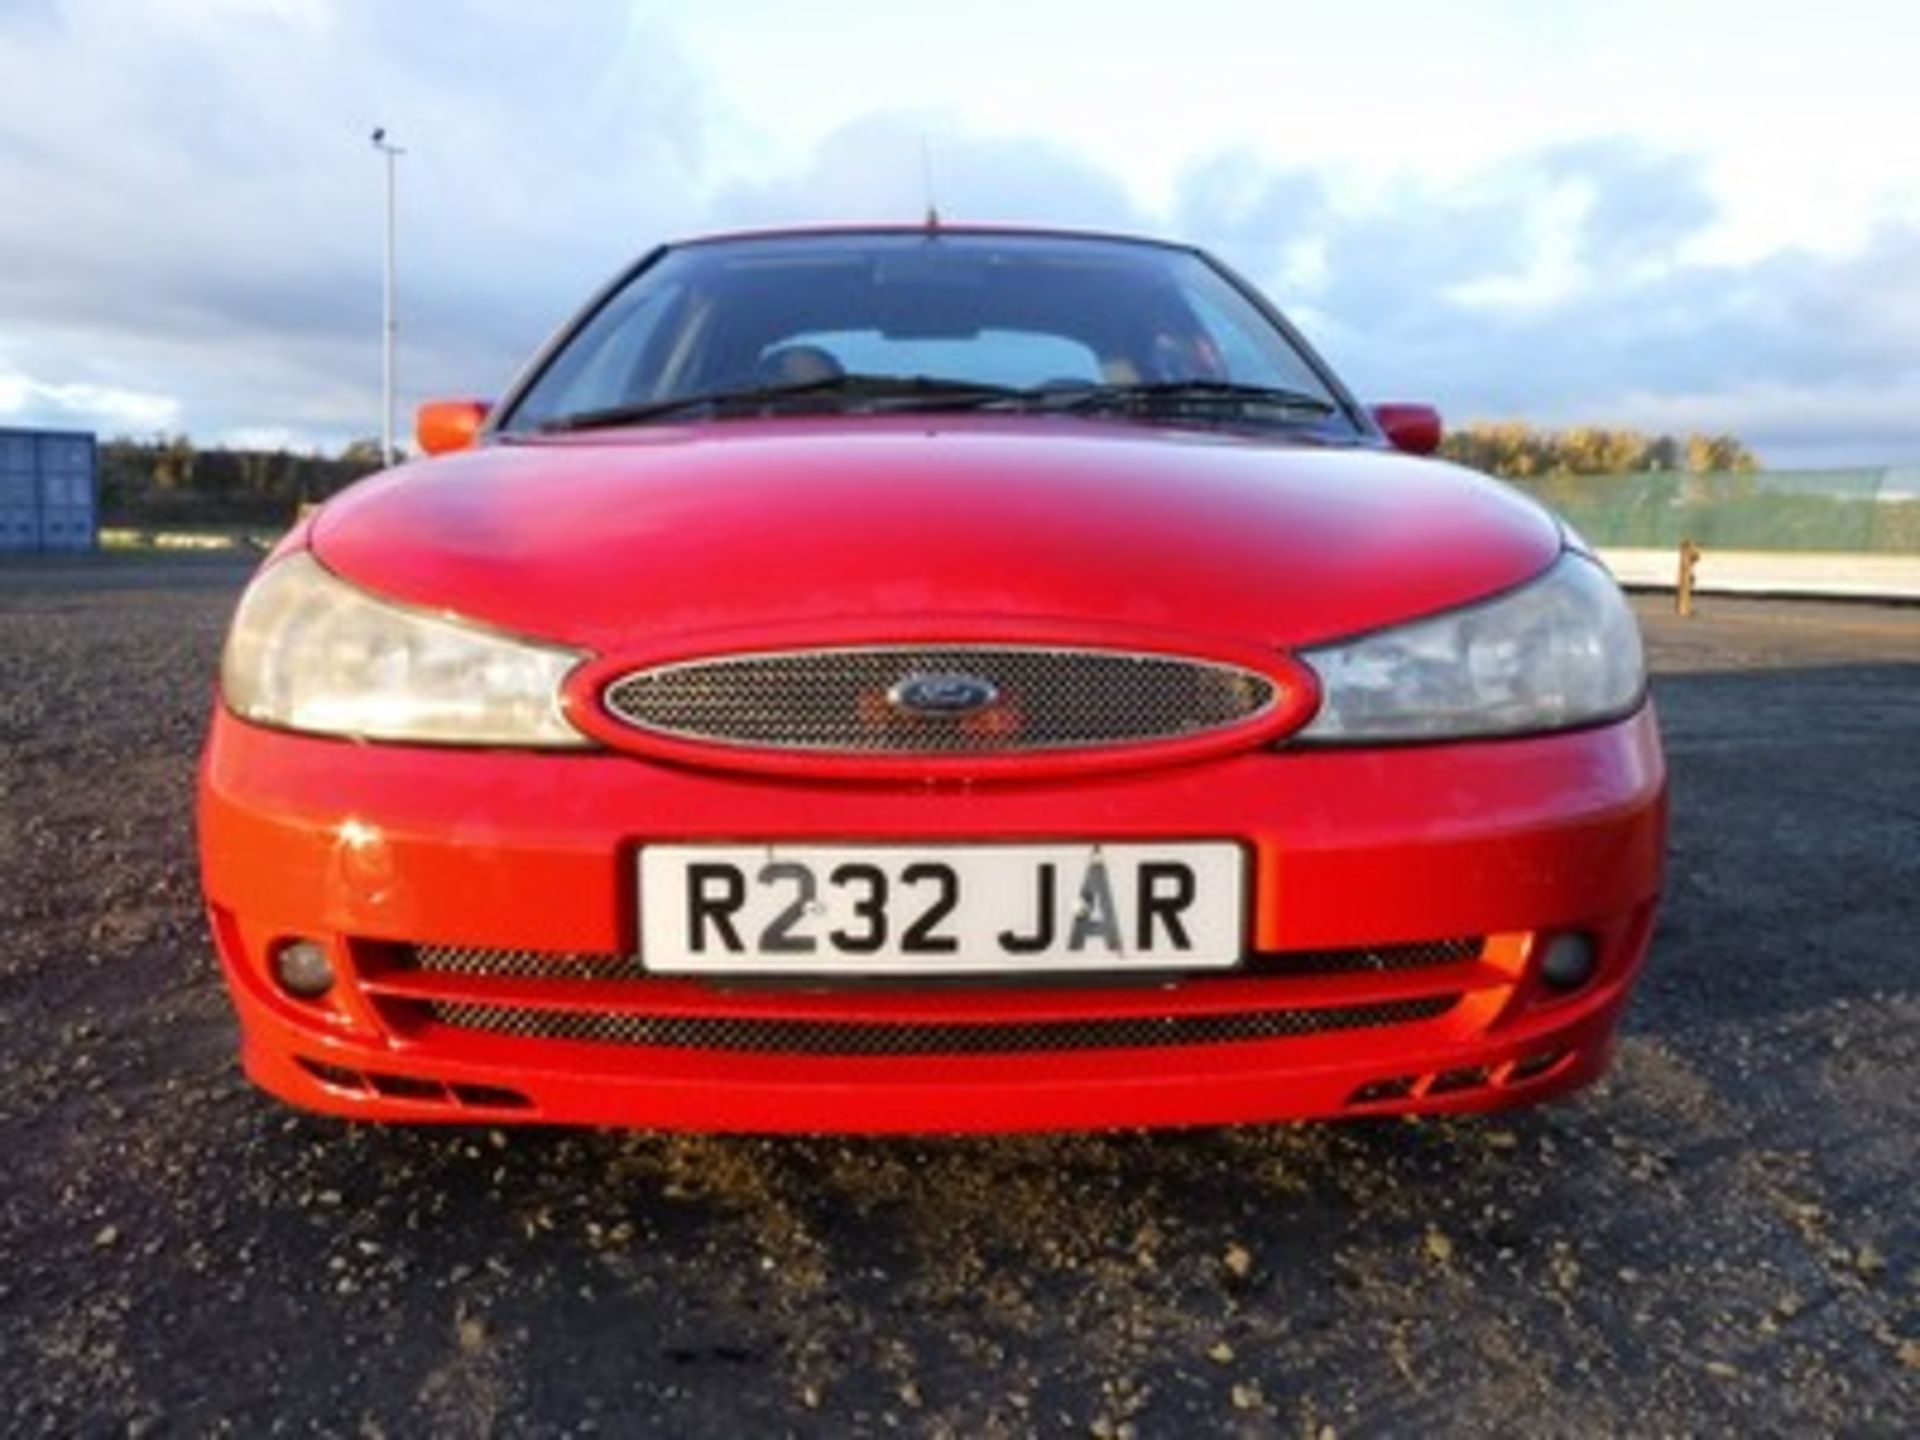 FORD MONDEO ST 24 V6 - 2497cc - Image 16 of 24